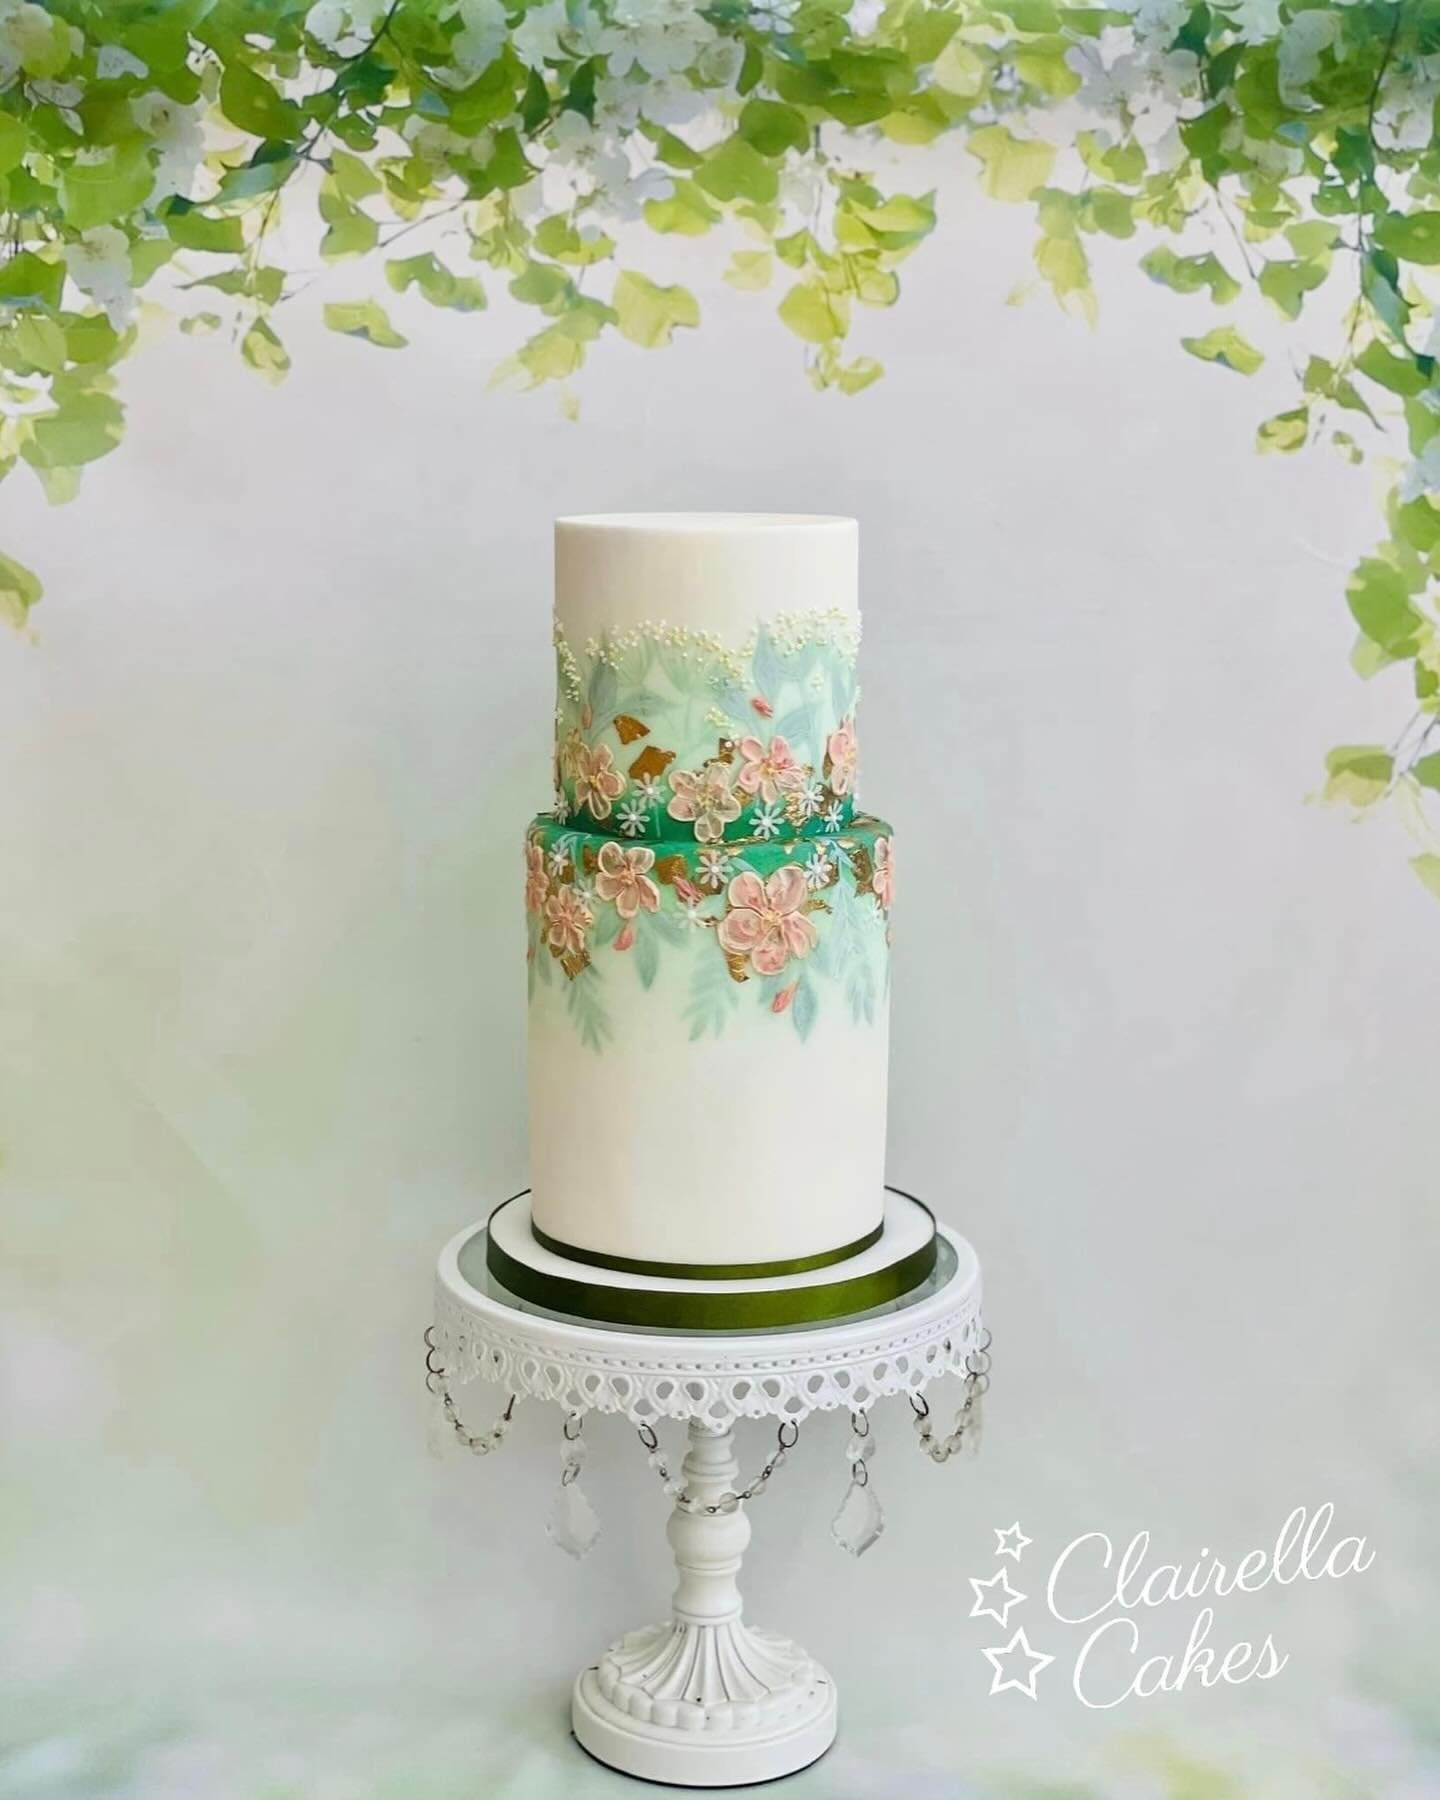 A pretty little Spring wedding cake for a gorgeous intimate garden &ldquo;Tea Party&rdquo;  wedding last weekend - thank goodness the weather was beautiful!

Bride &amp; Groom - (Chloe &amp; Callum) supplied their own cake topper so this was the befo